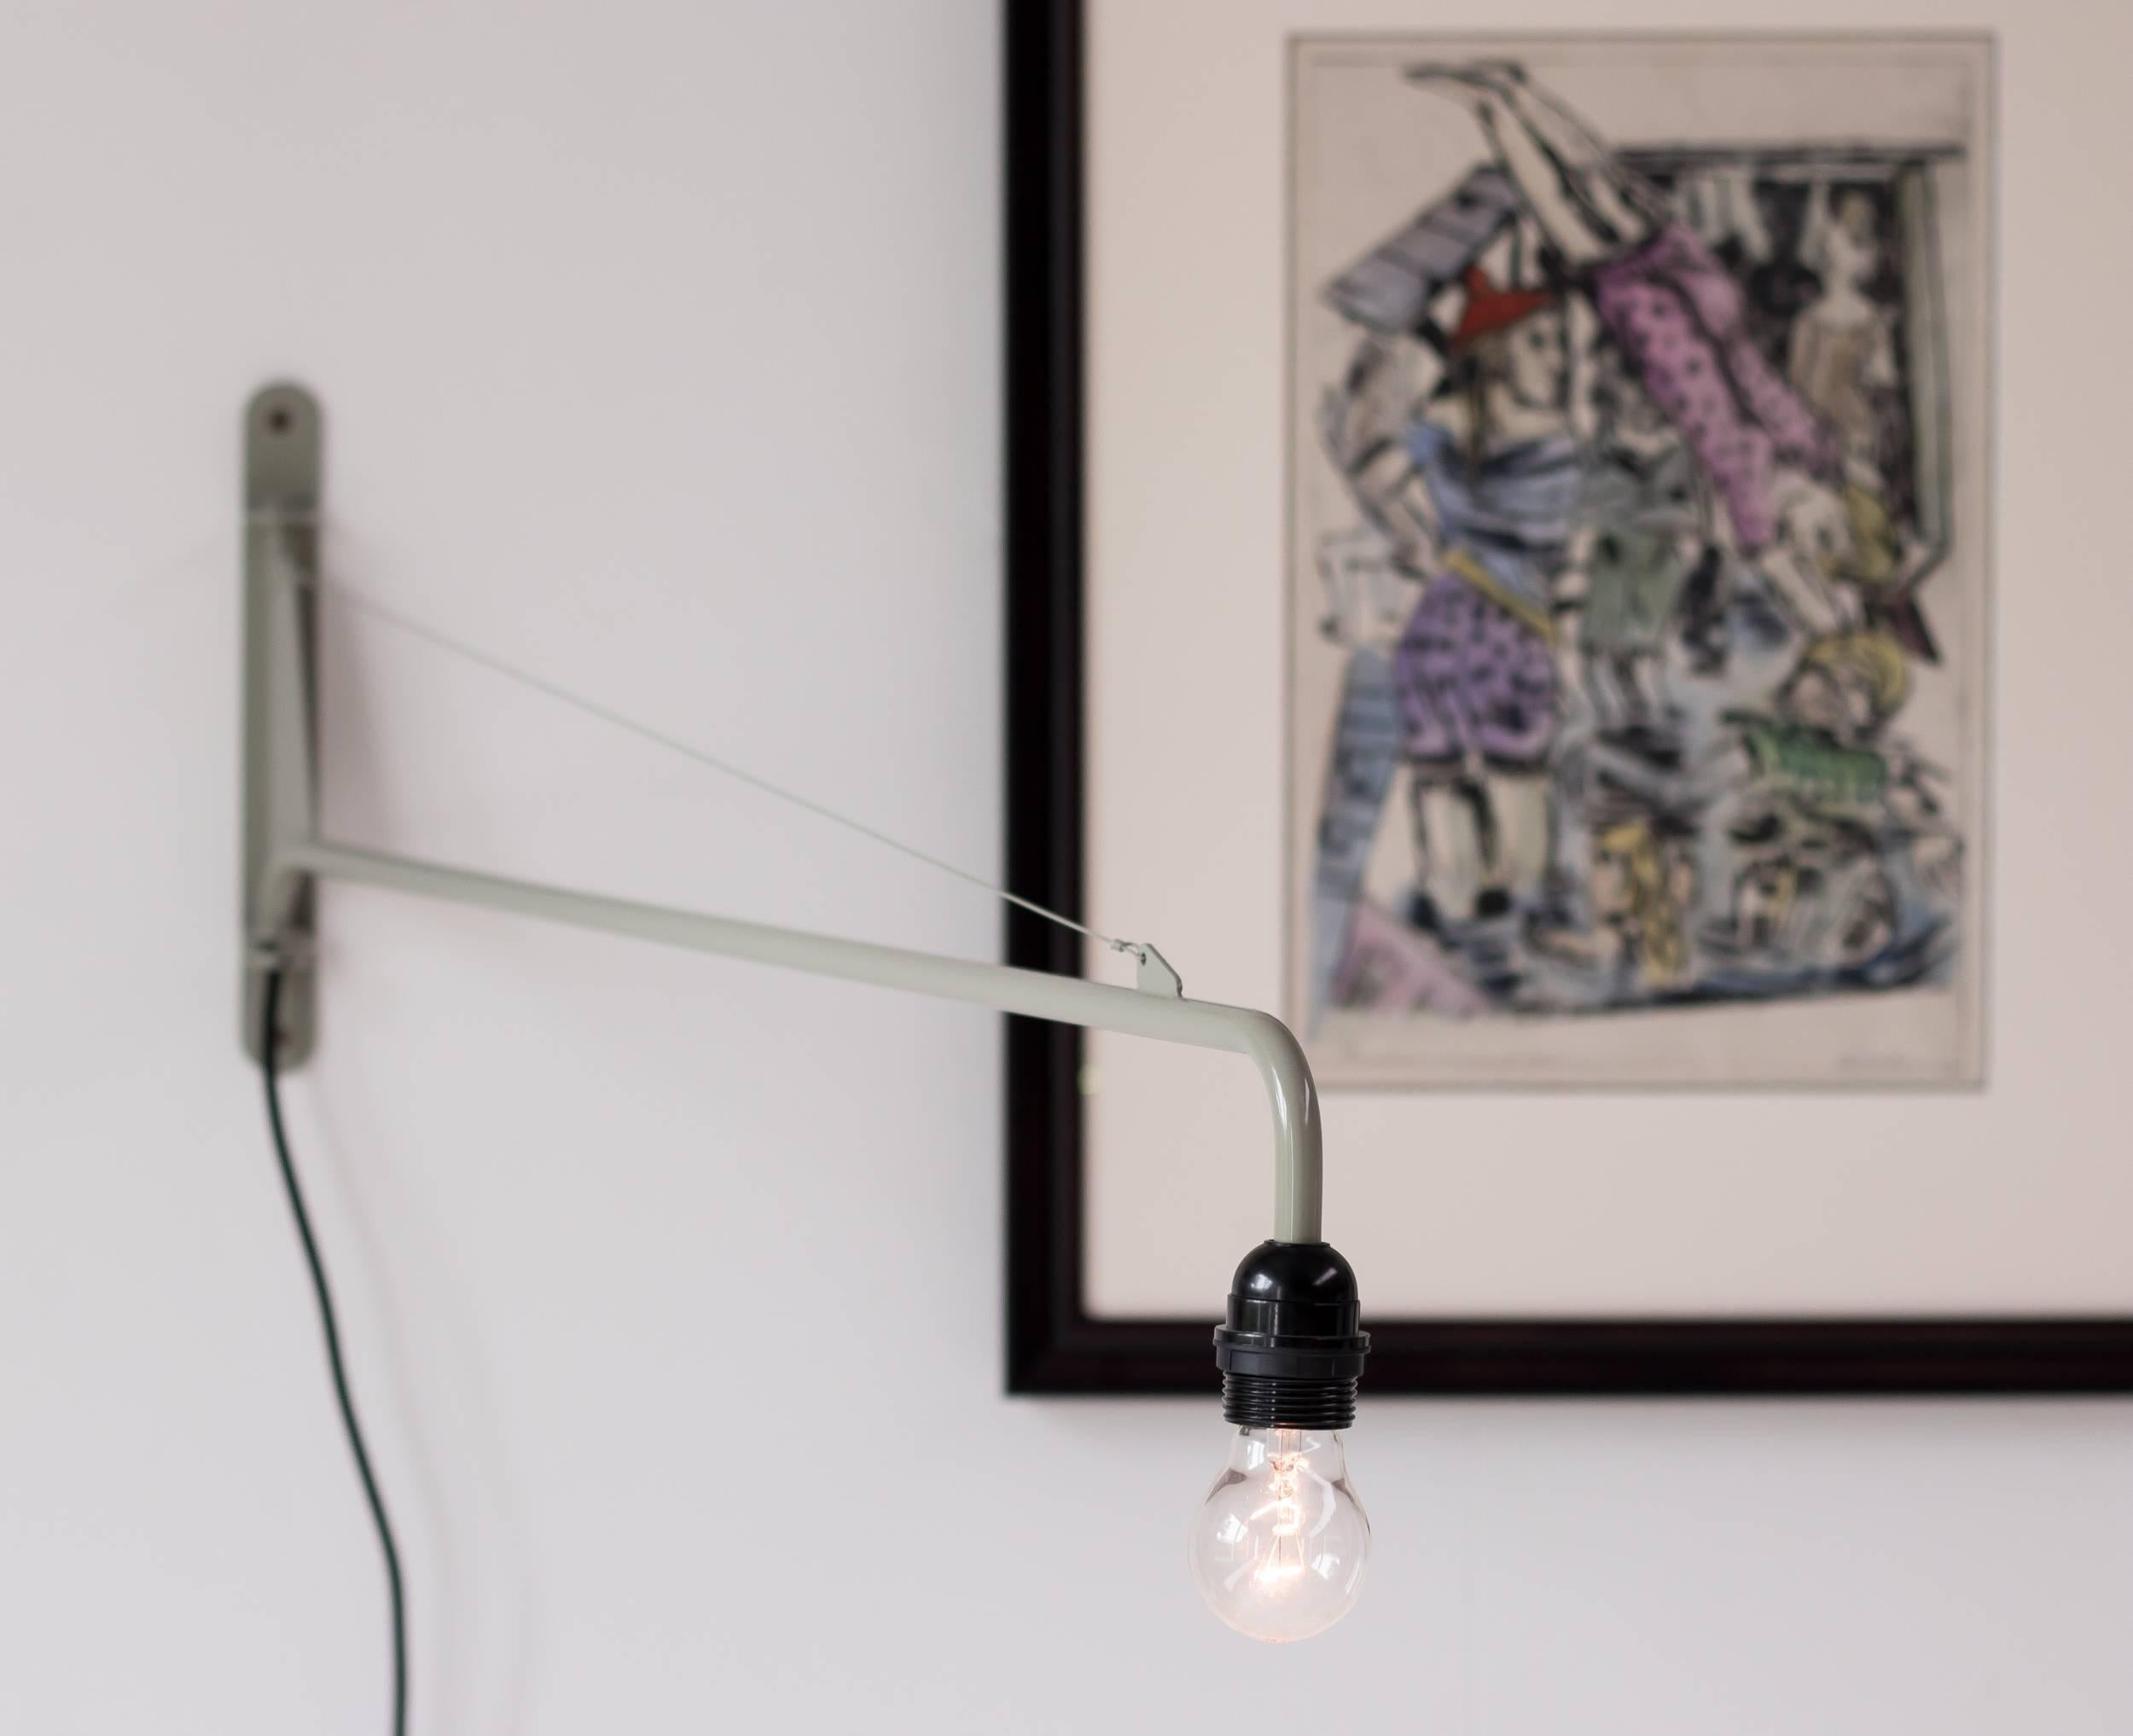 Limited edition Petit Potence lamp, designed by Jean Prouvé.
Marked with metal label, made in 2014 for 1 year only.

